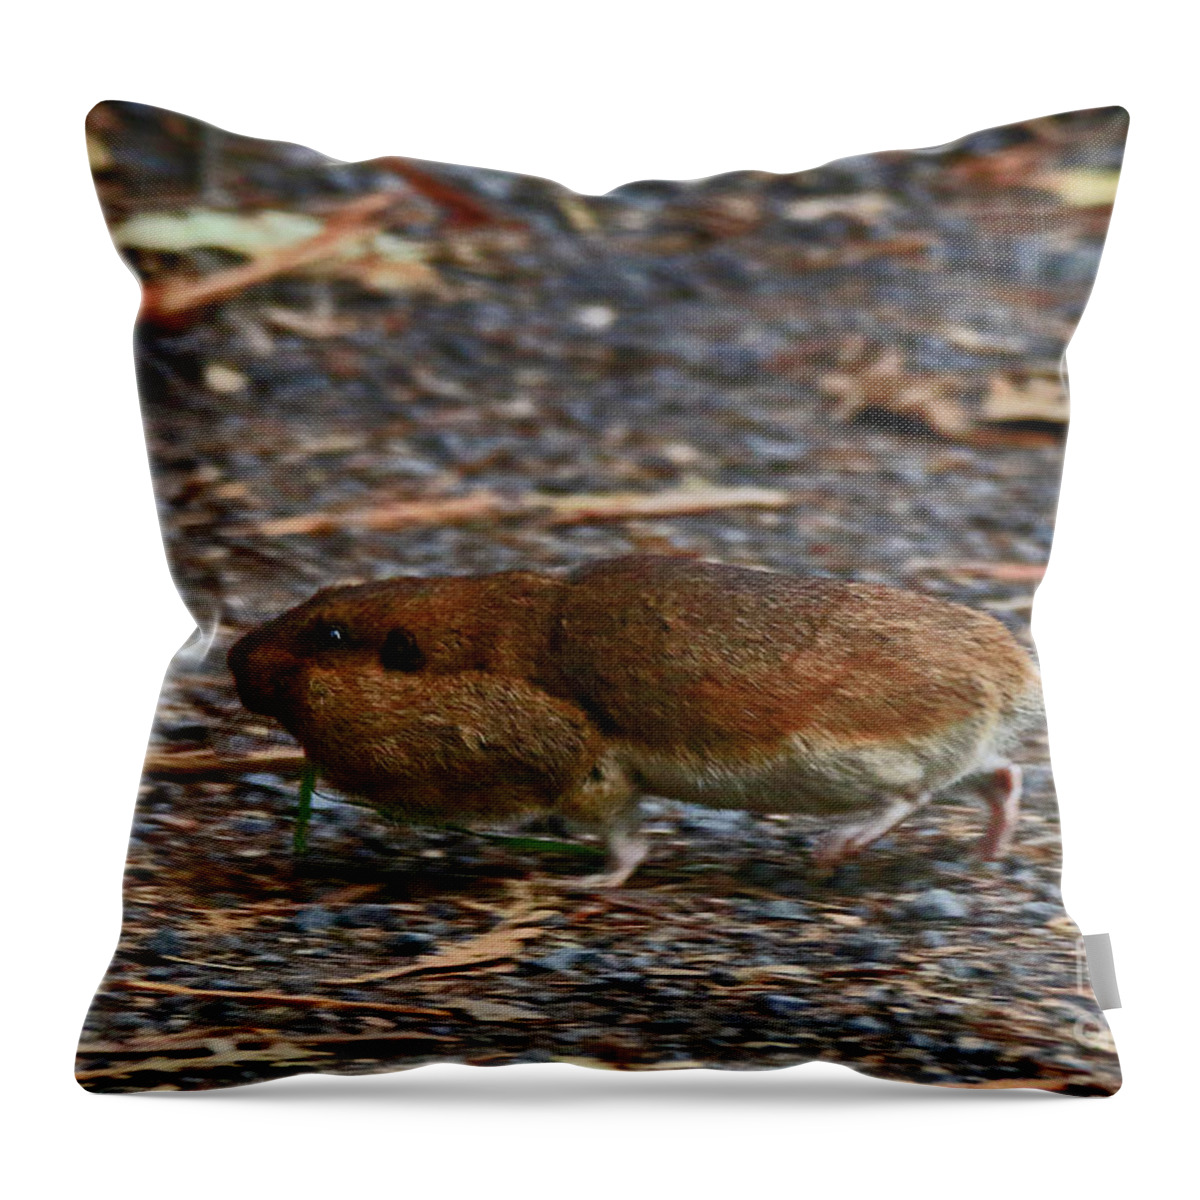 Gopher Throw Pillow featuring the photograph Mr Twinkle Toes by Craig Corwin